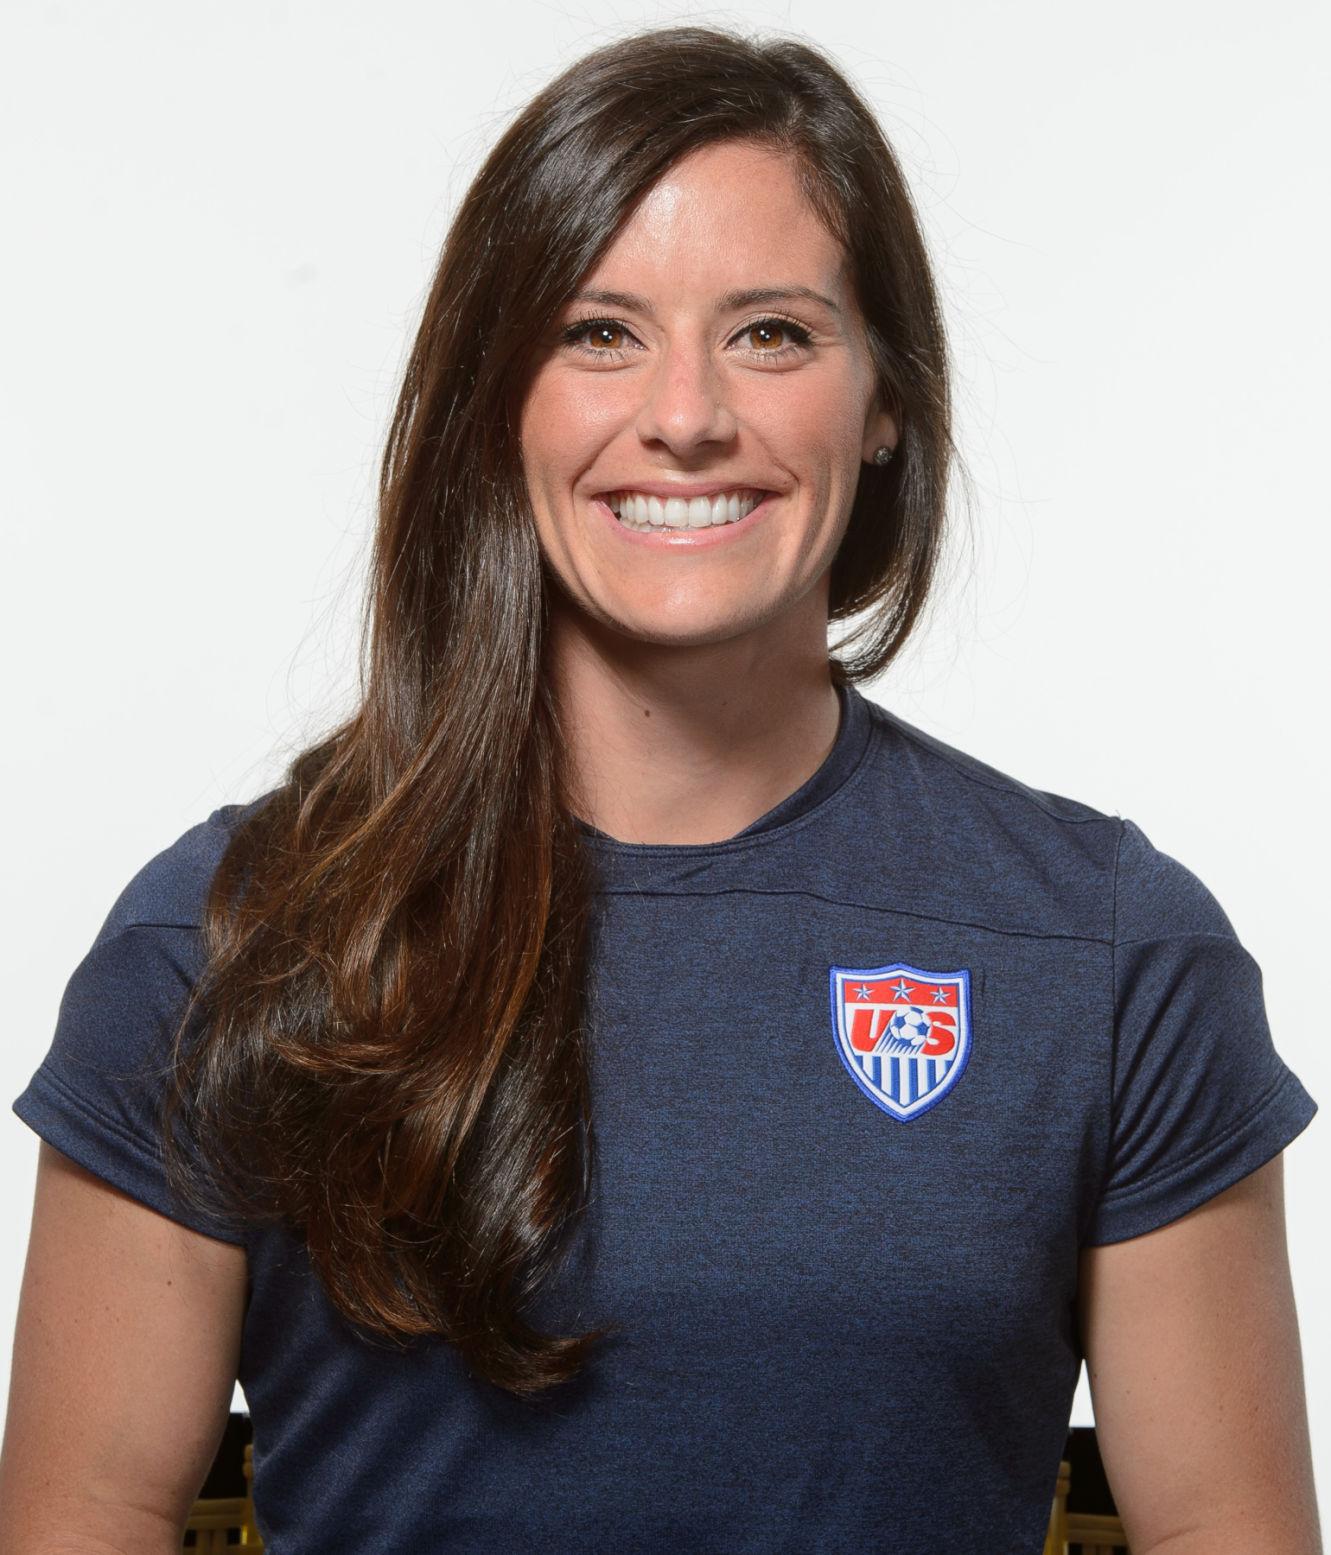 Forest Park’s Ali Krieger now a World Cup champion | Headlines ...